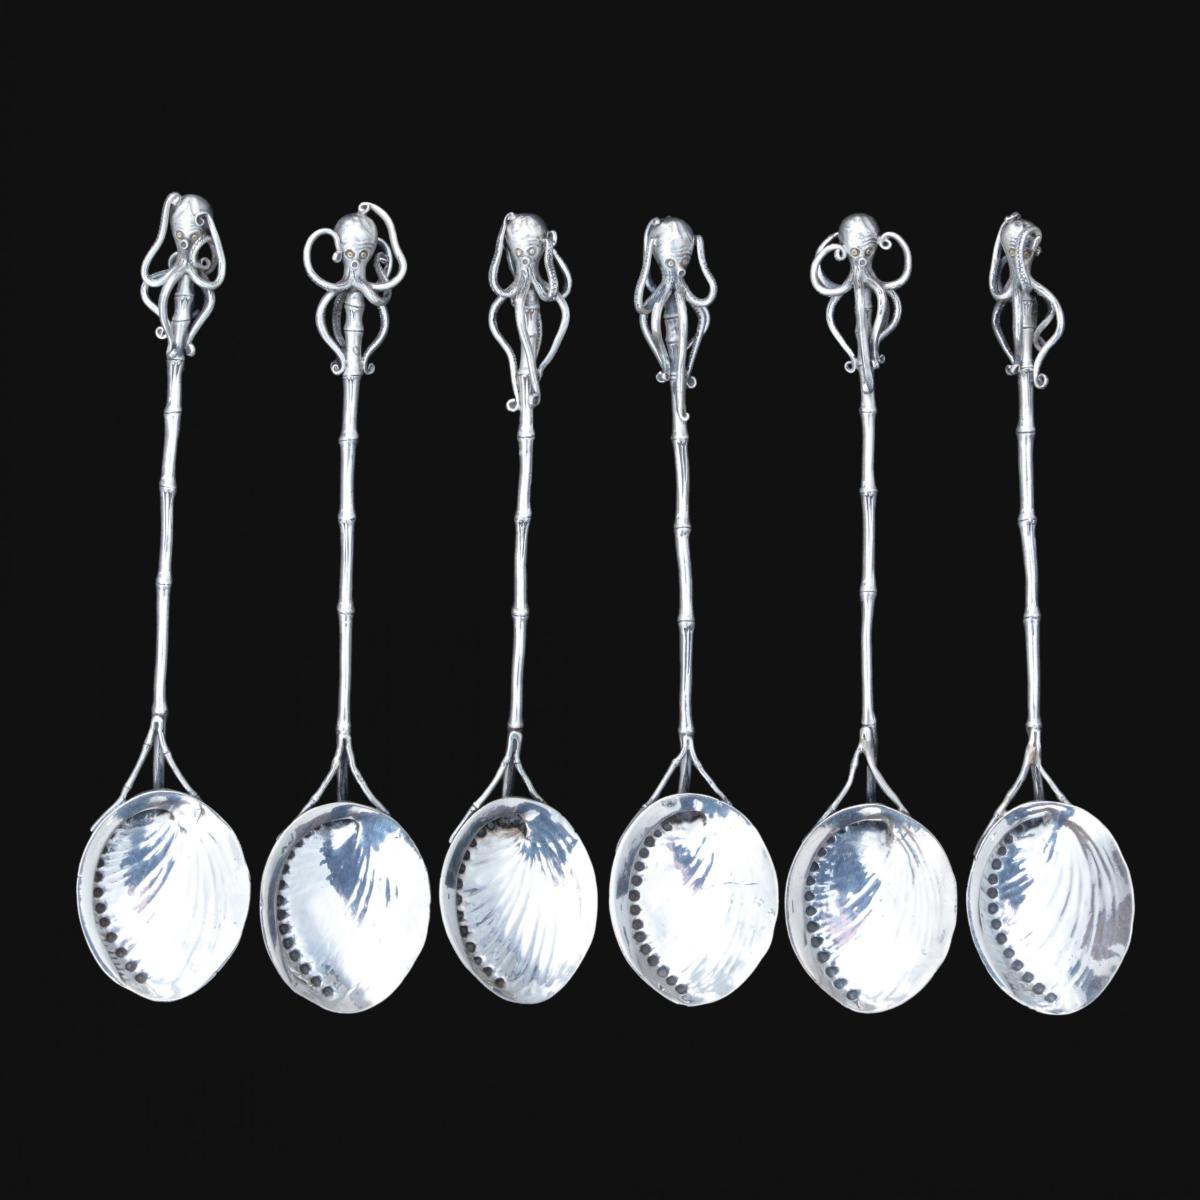 Liberty japanese silver octopus spoons